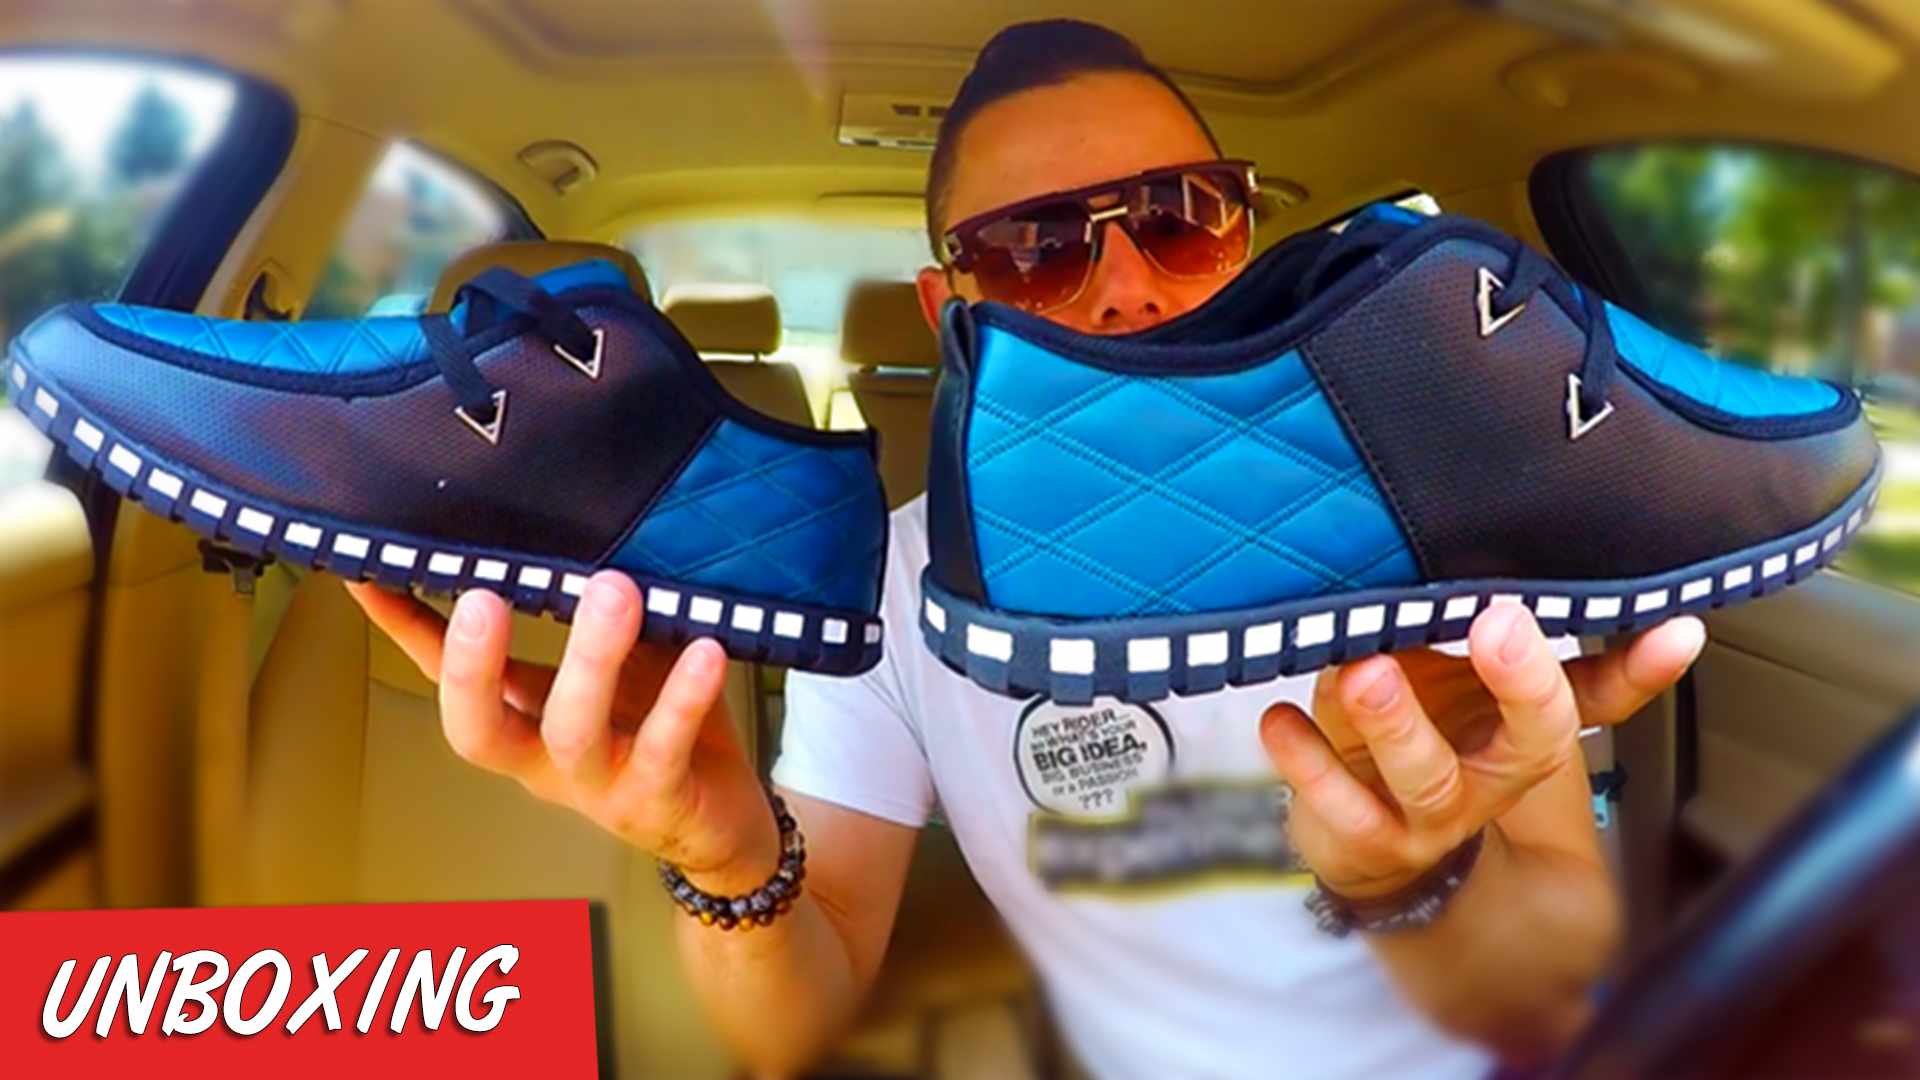 A&B FASHION SPORT Shoes - $10 Blue Black Quilted Sneakers / Chukka Boots Unboxing & Review